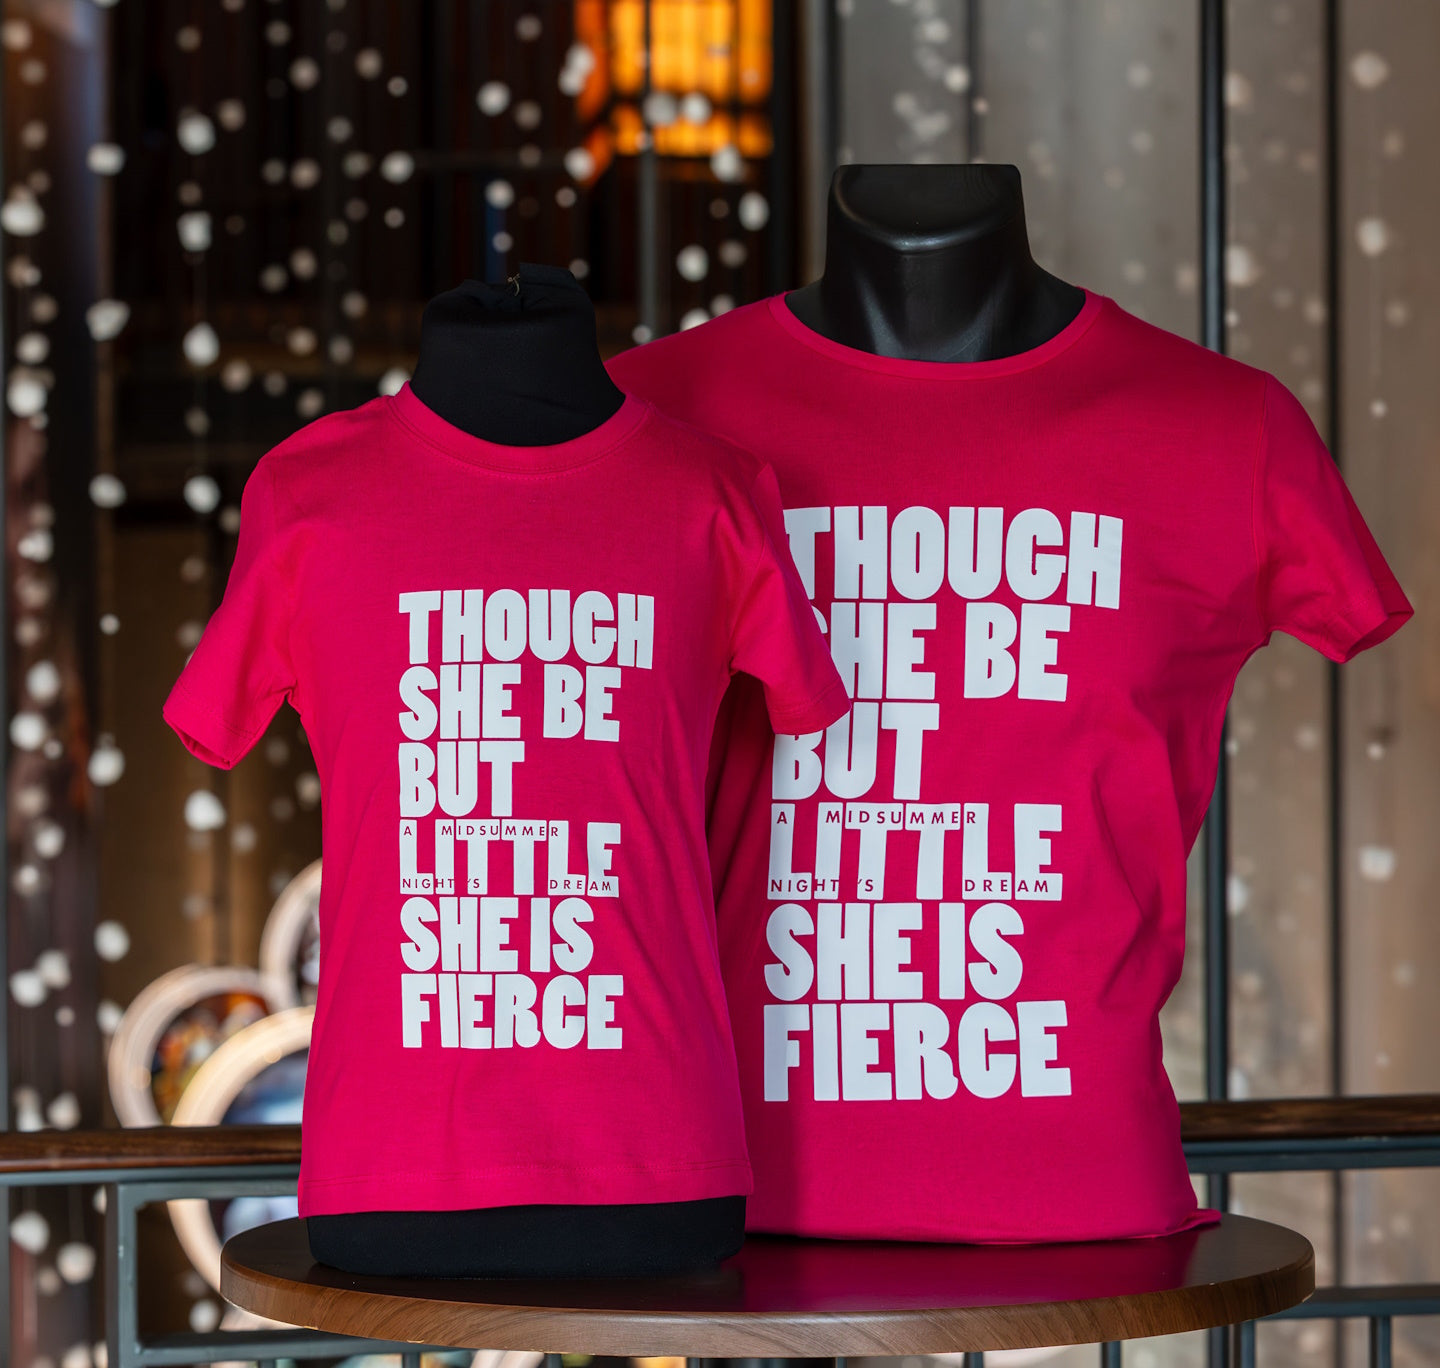 Ladies T Shirt: Though She Be but Little She Is Fierce Pink